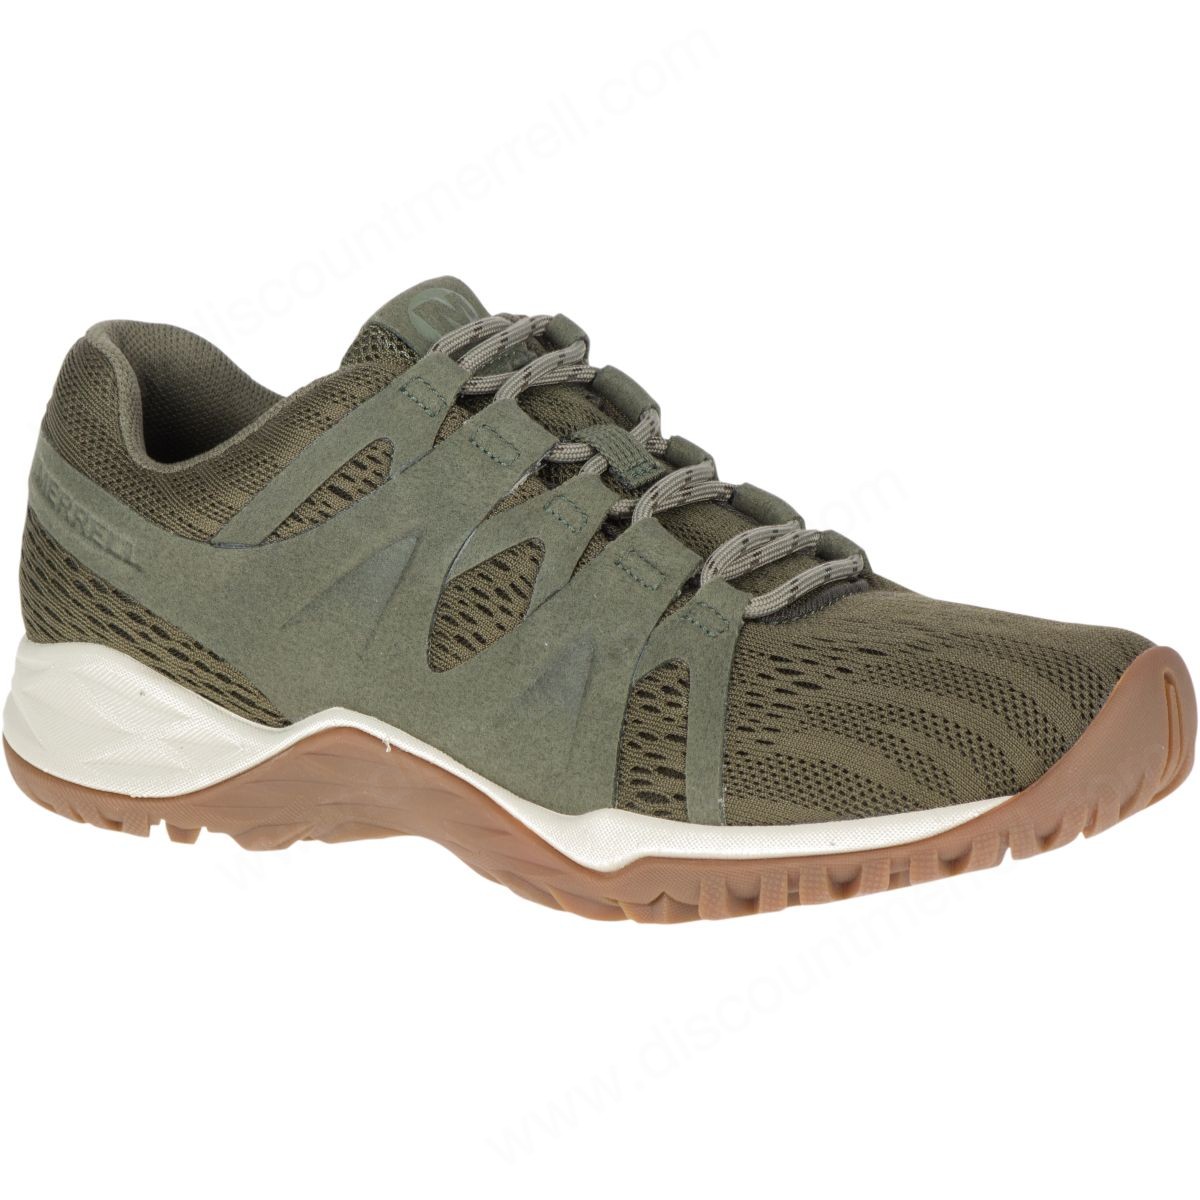 Merrell Lady's Siren Guided Lace Q2 Dusty Olive - Merrell Lady's Siren Guided Lace Q2 Dusty Olive